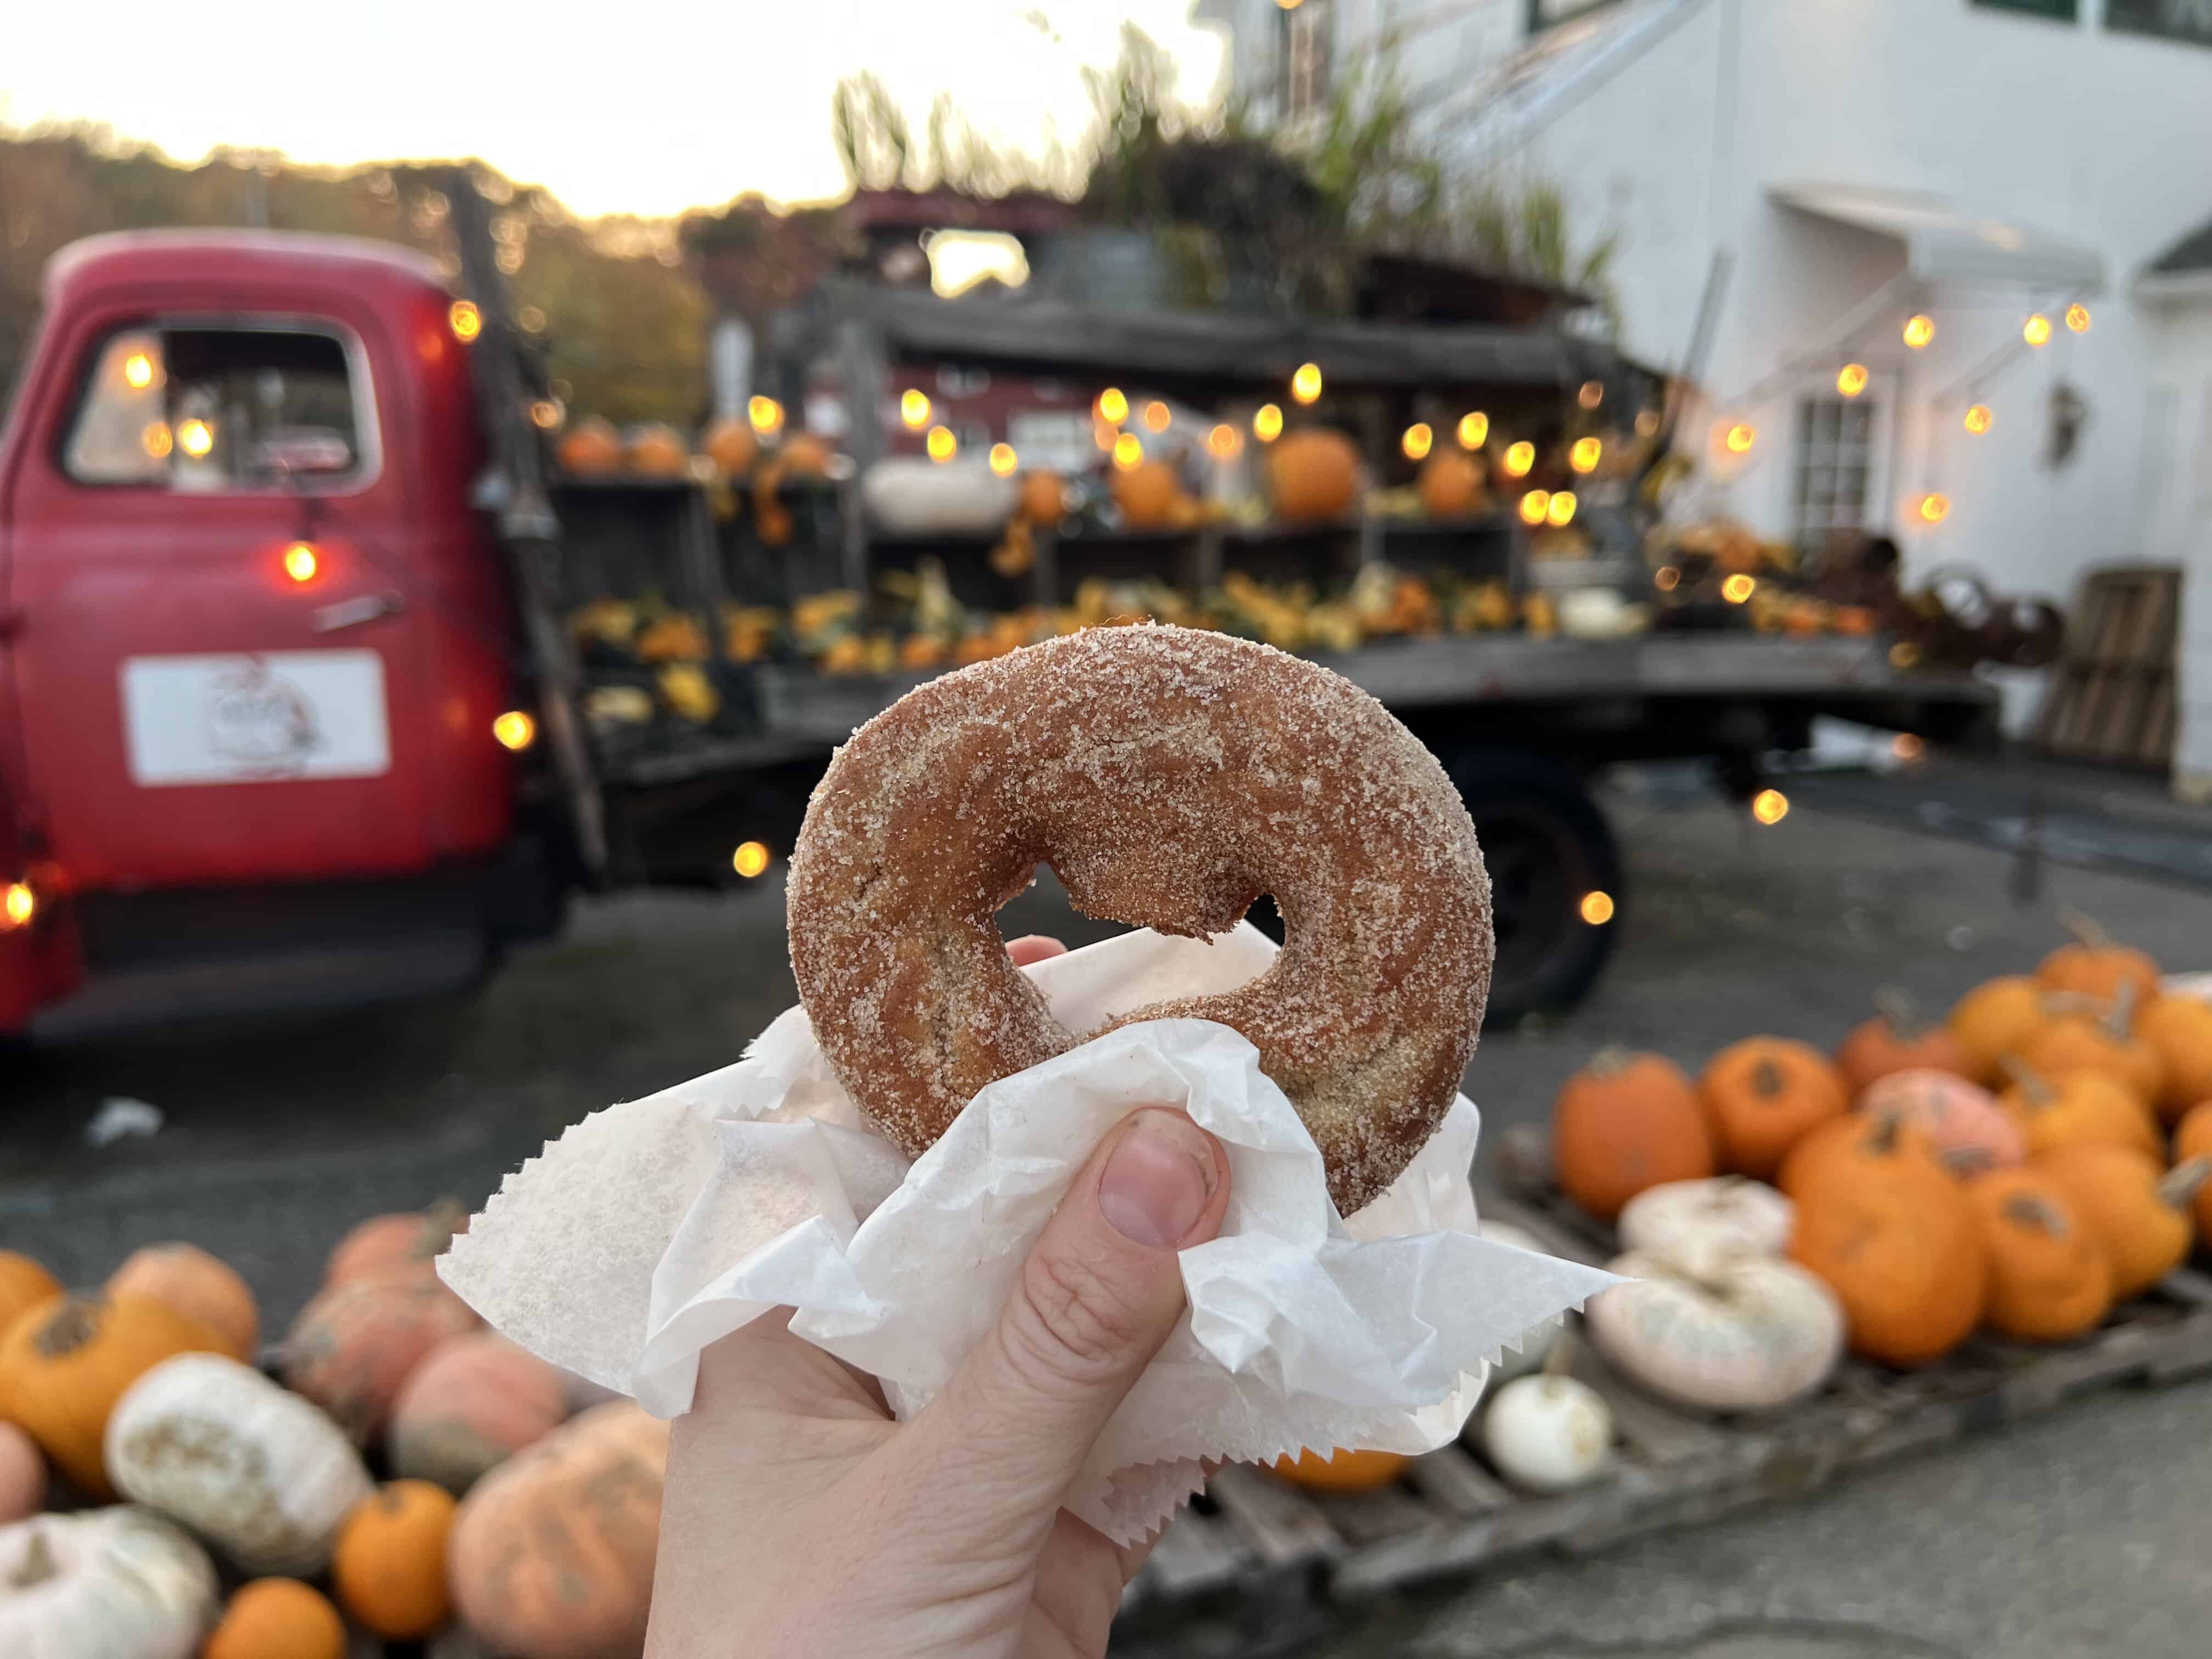 A hand holds a cinnamon sugar-dusted apple cider donut, a treat synonymous with New England fall activities, with a festive background of pumpkins and twinkling lights adorning a vintage red truck.